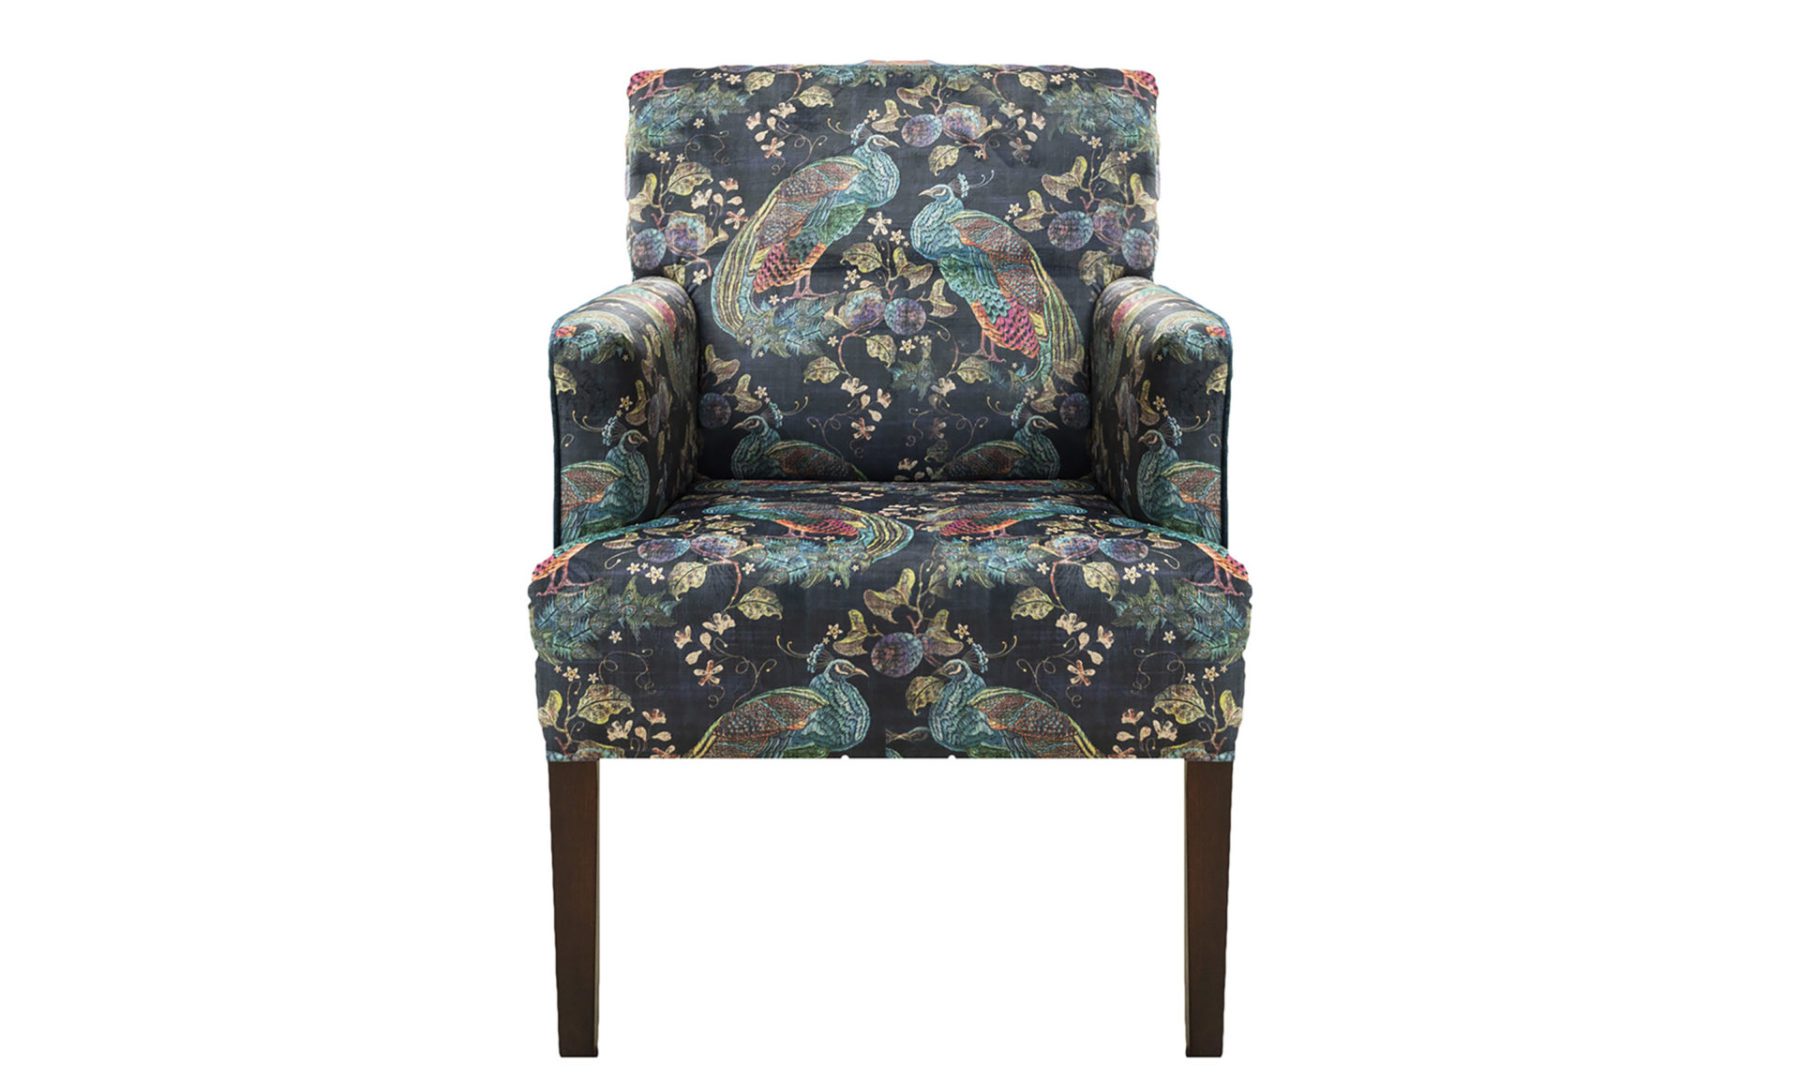 Lisa Chair in Peacock Navy, Platinum Collection Fabric - 405860